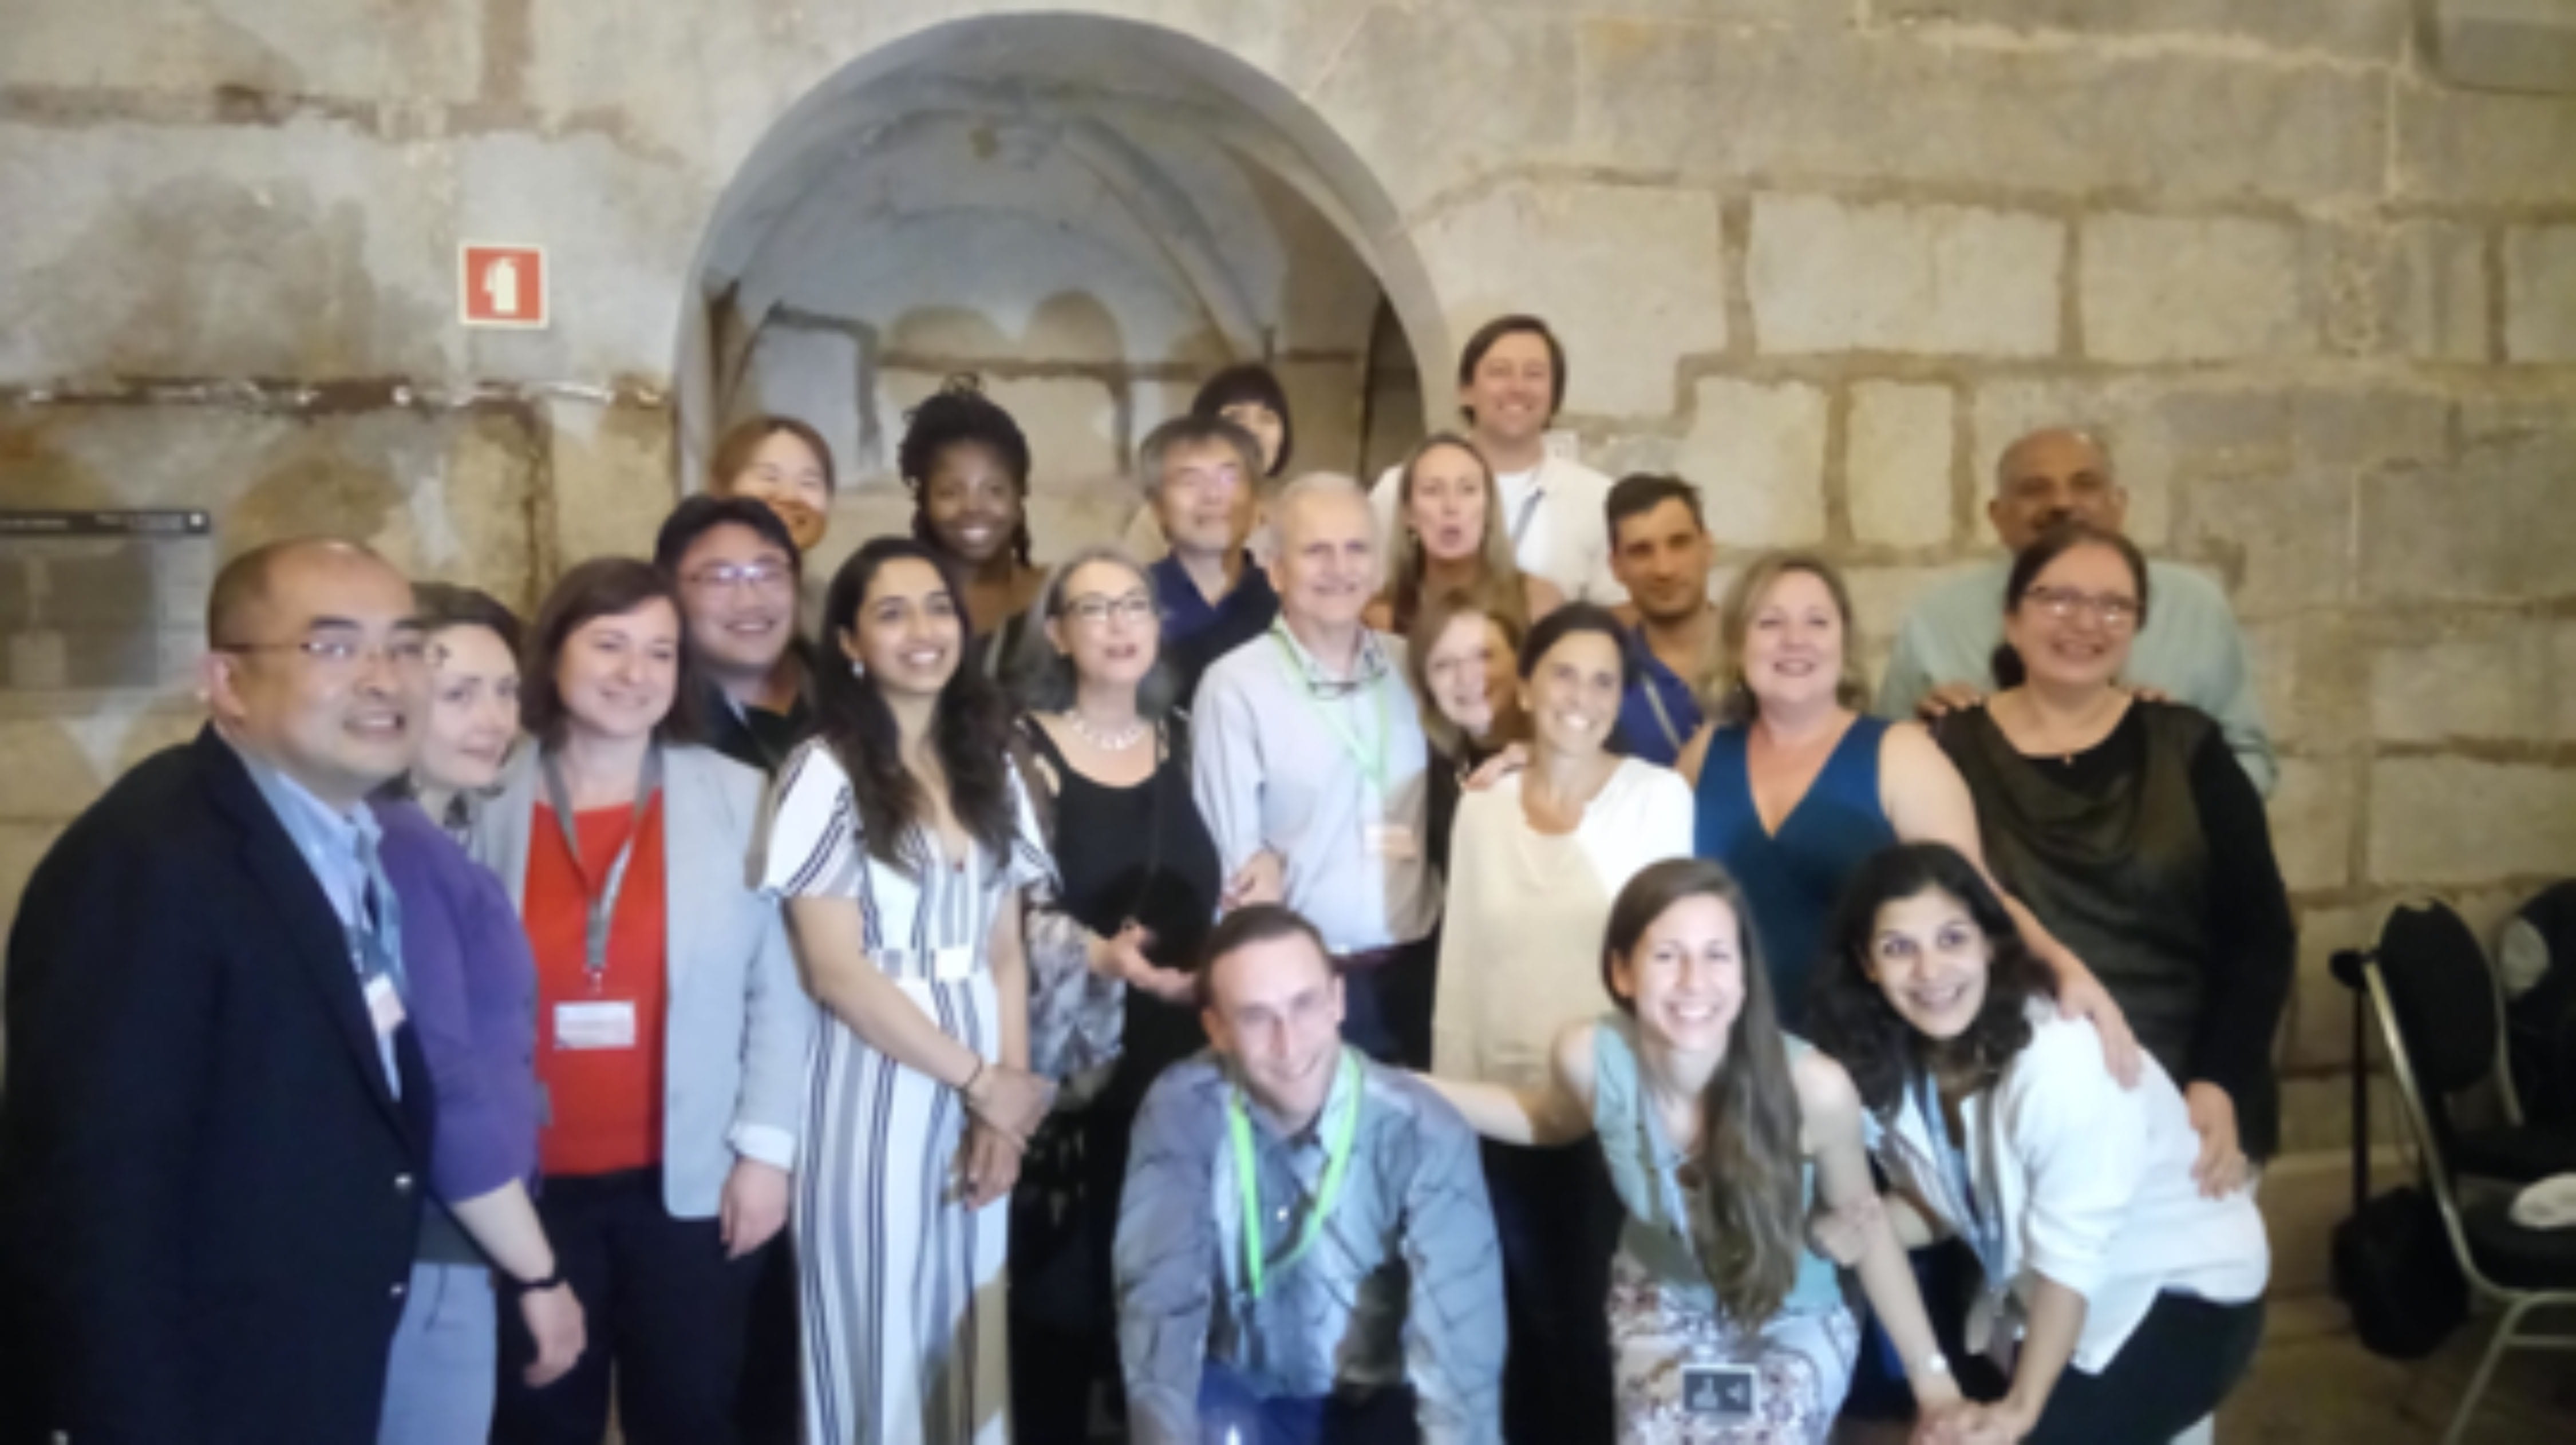 Group picture at 13th Sphingolipid Club & 10th International Ceramide Conference in Cascais, Portugal, May 6-10 2019